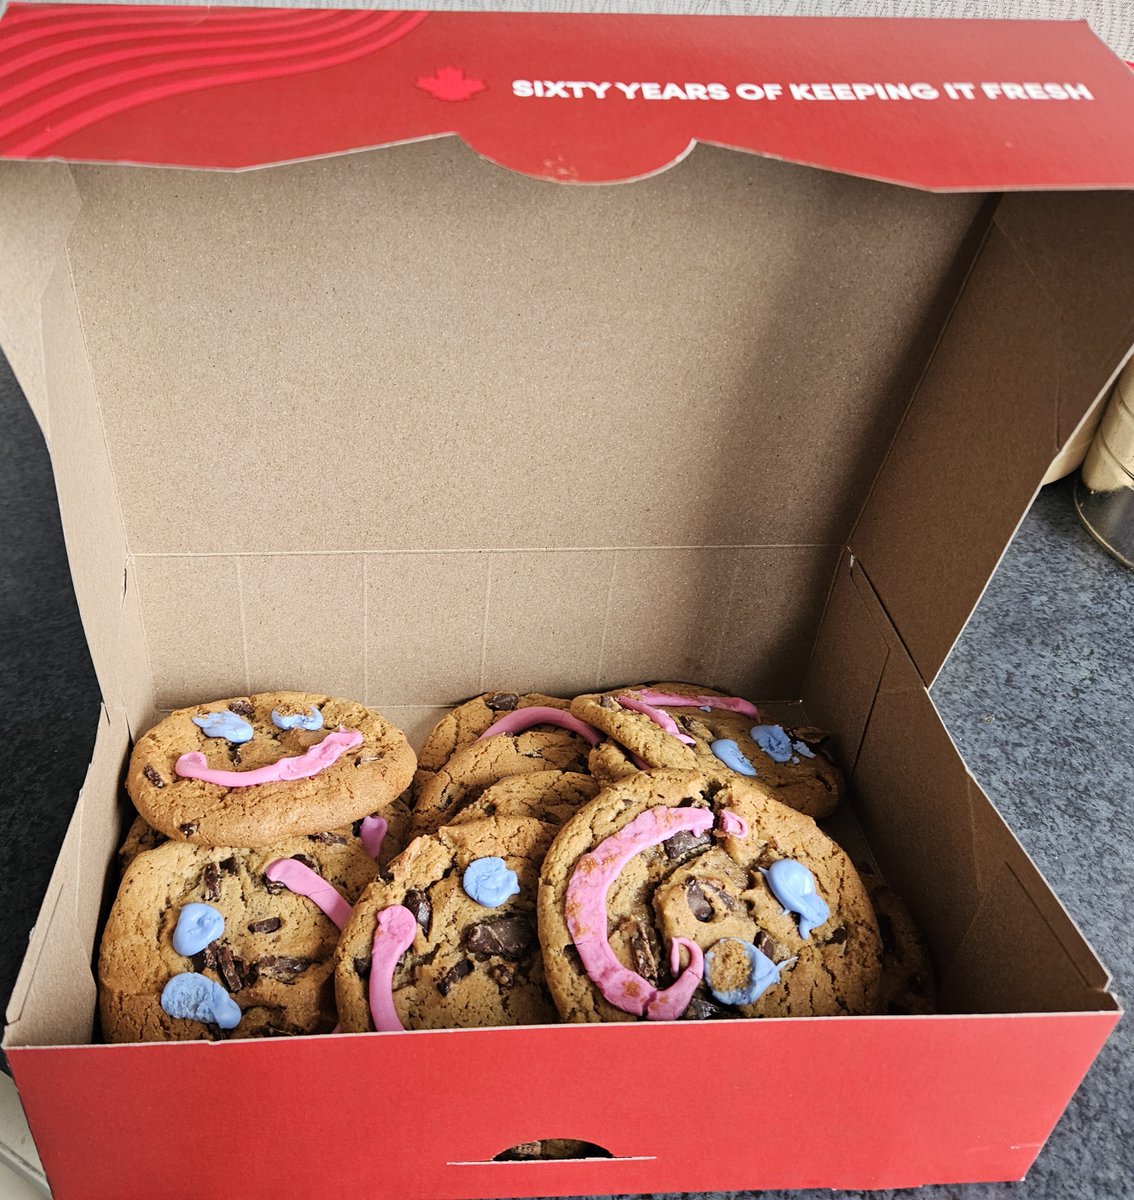 @PrinceAlbertSPC we got our #SmilesOn here at the Prince Albert Daily Herald with some delicious #SmileCookies from @TimHortons in Prince Albert!

#Smile #SmileCookies #TimHortons #PrinceAlbertSPCA #Donation #Support